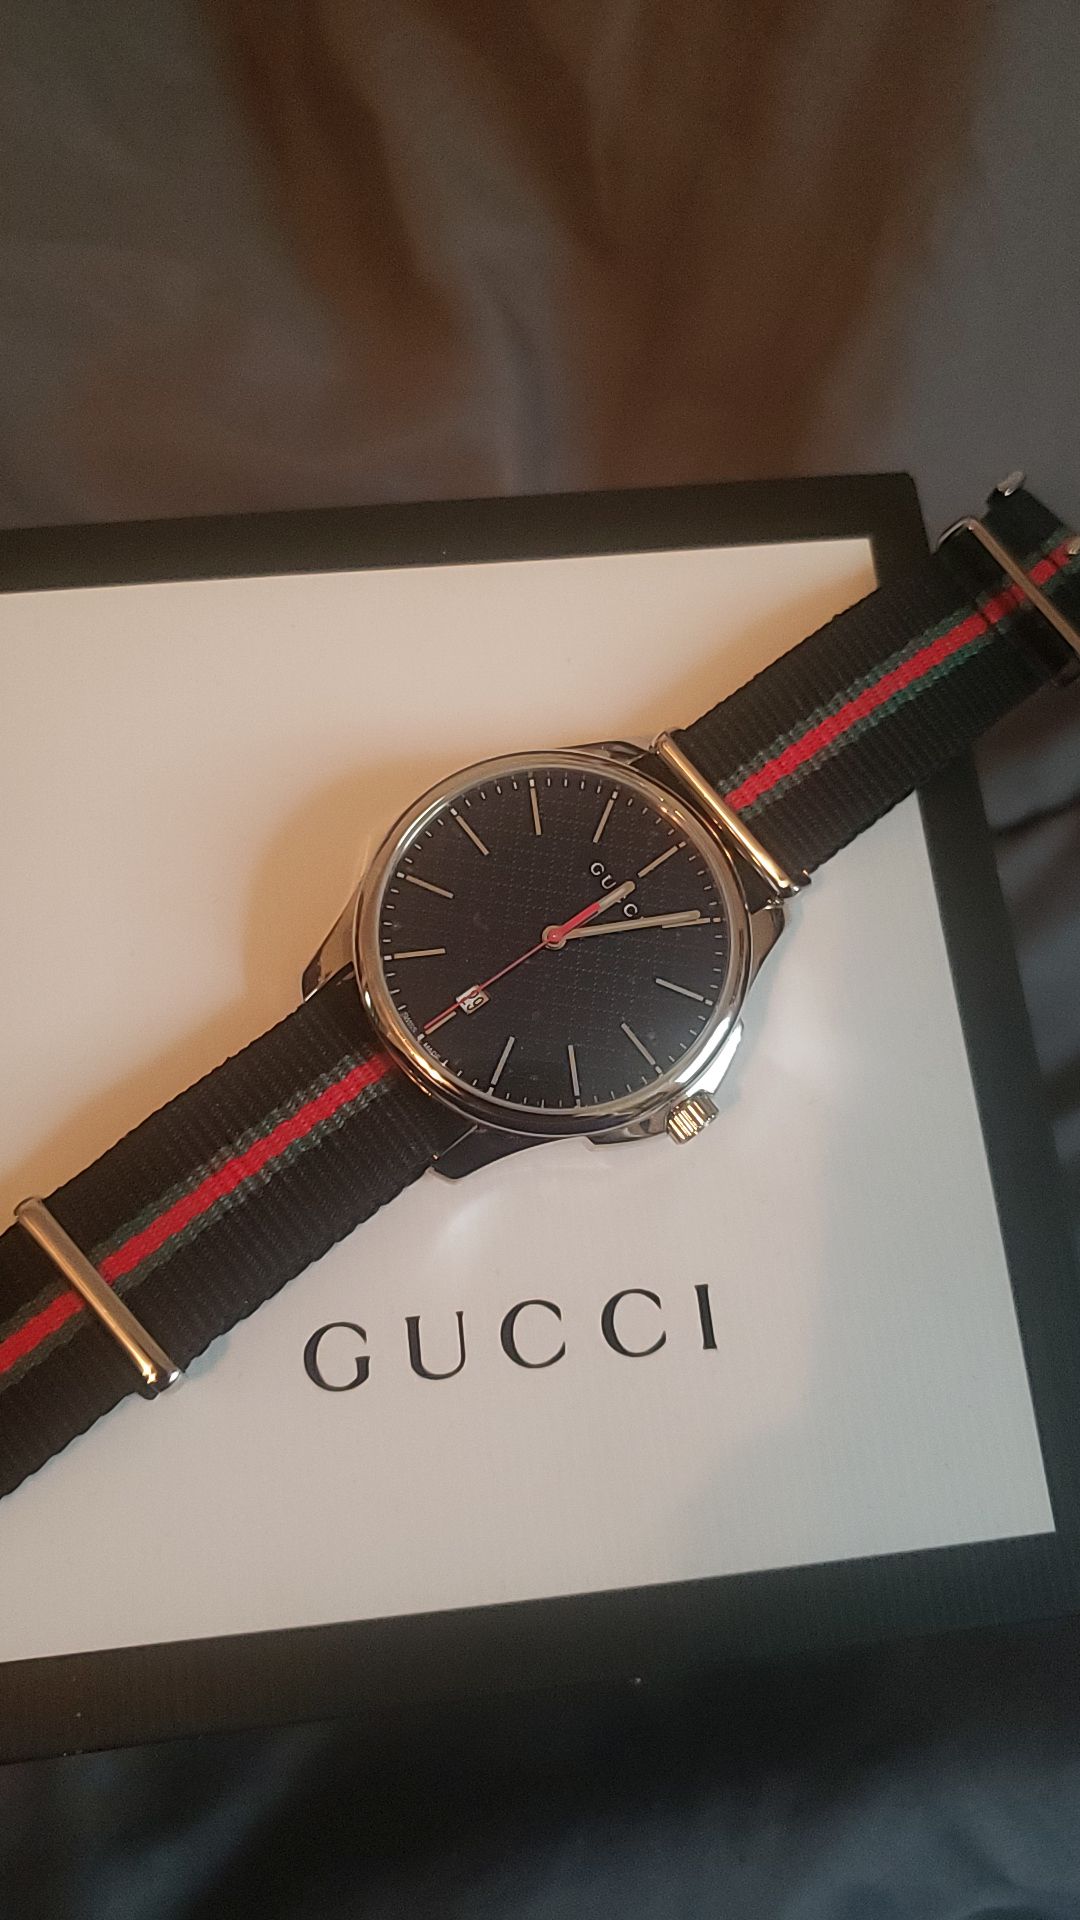 Gucci Watch brand new only $275